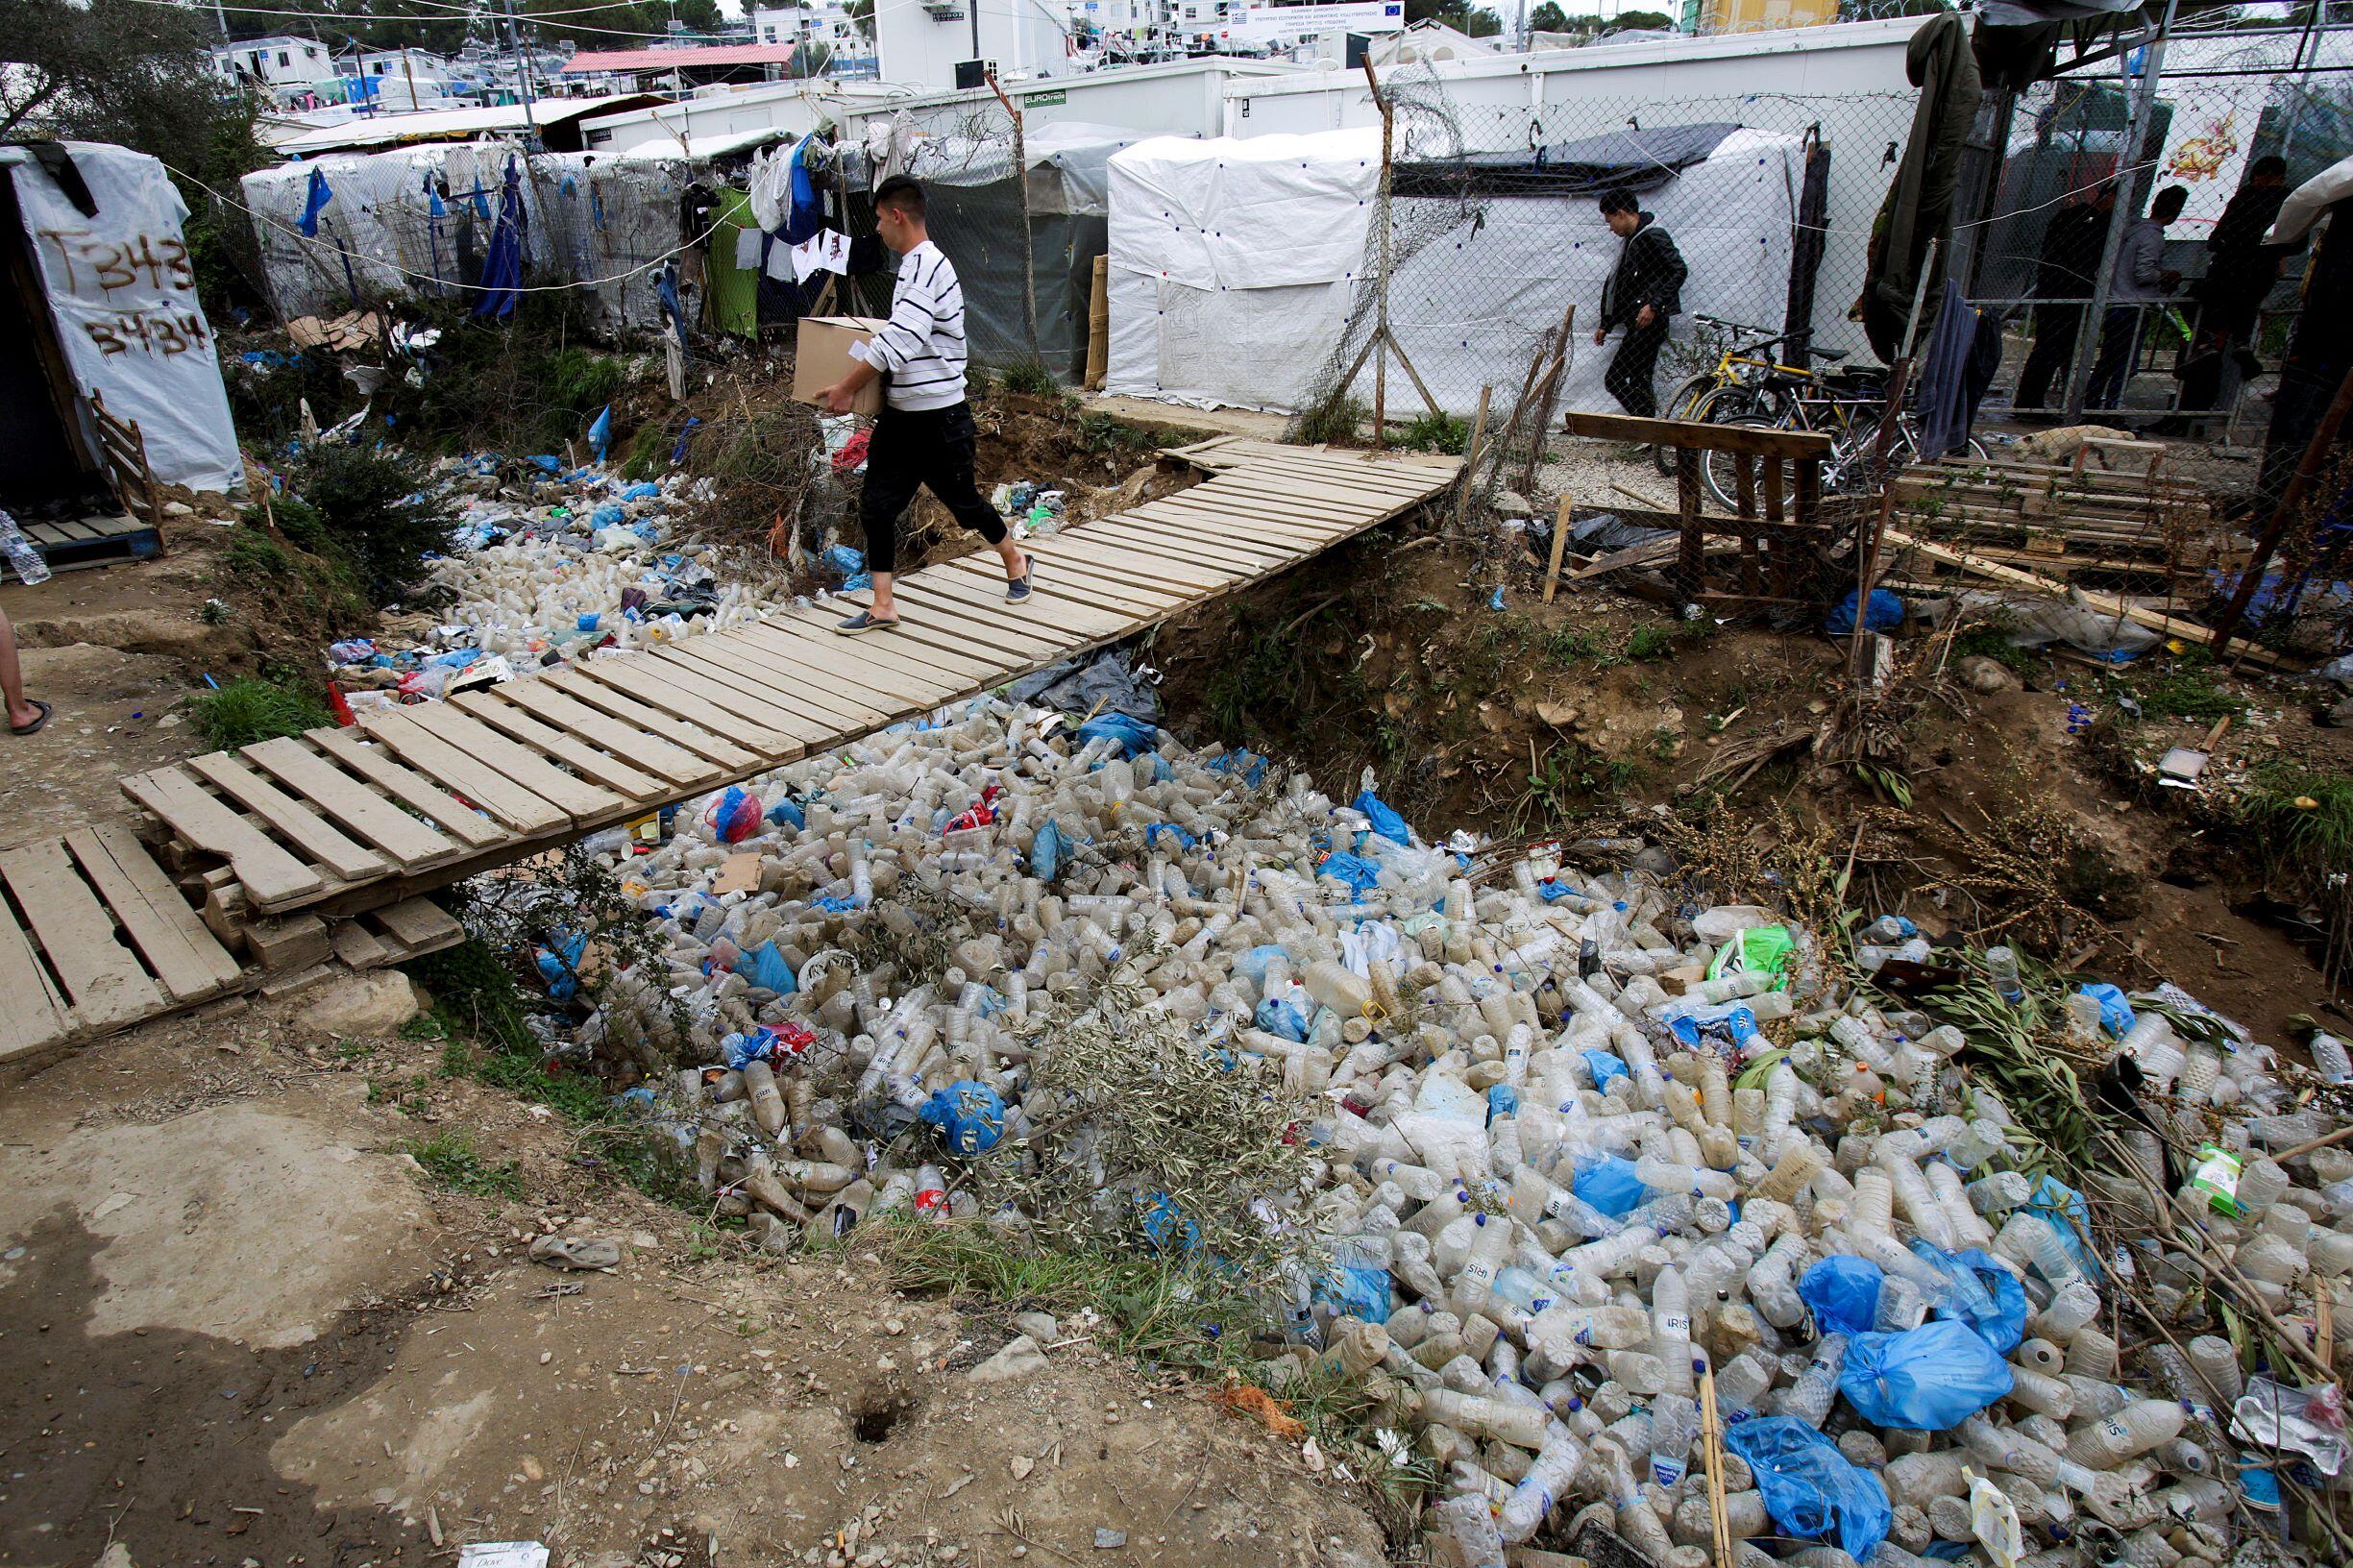 Man walking on wooden bridge under which are many discarded plastic bottles and rubbish